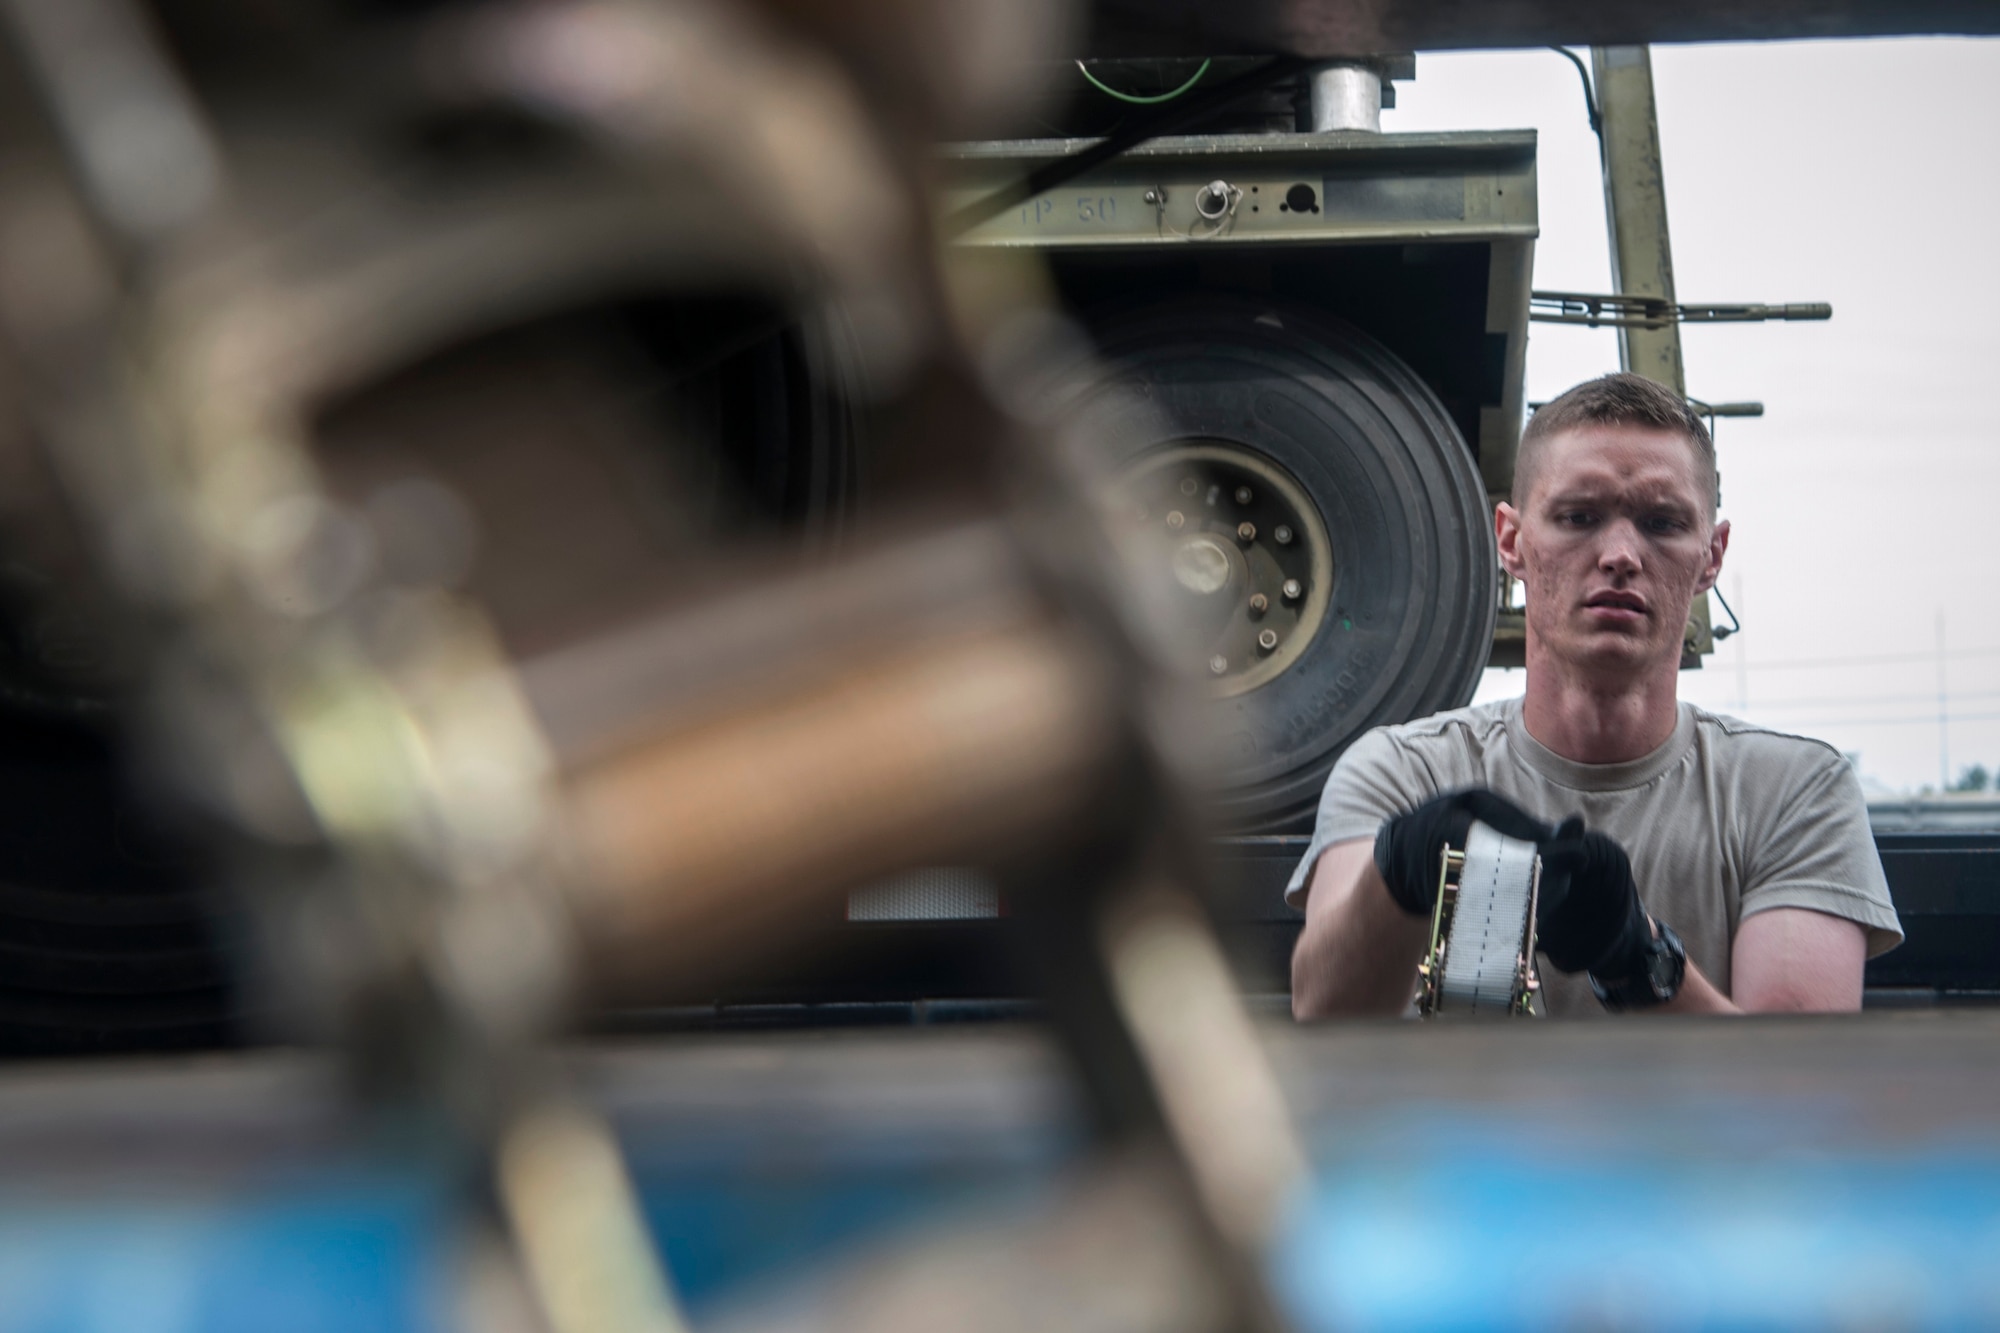 Airman 1st Class Ian Acorn, 8th Logistics Readiness Squadron vehicle operator, straps cargo onto a long-bed truck at Kunsan Air Base, Republic of Korea, Sept. 9, 2014. The equipment is being sent to Osan AB to support 8th Fighter Wing flying operations while the runway at Kunsan undergoes construction.  (U.S. Air Force photo by Senior Airman Taylor Curry/Released)